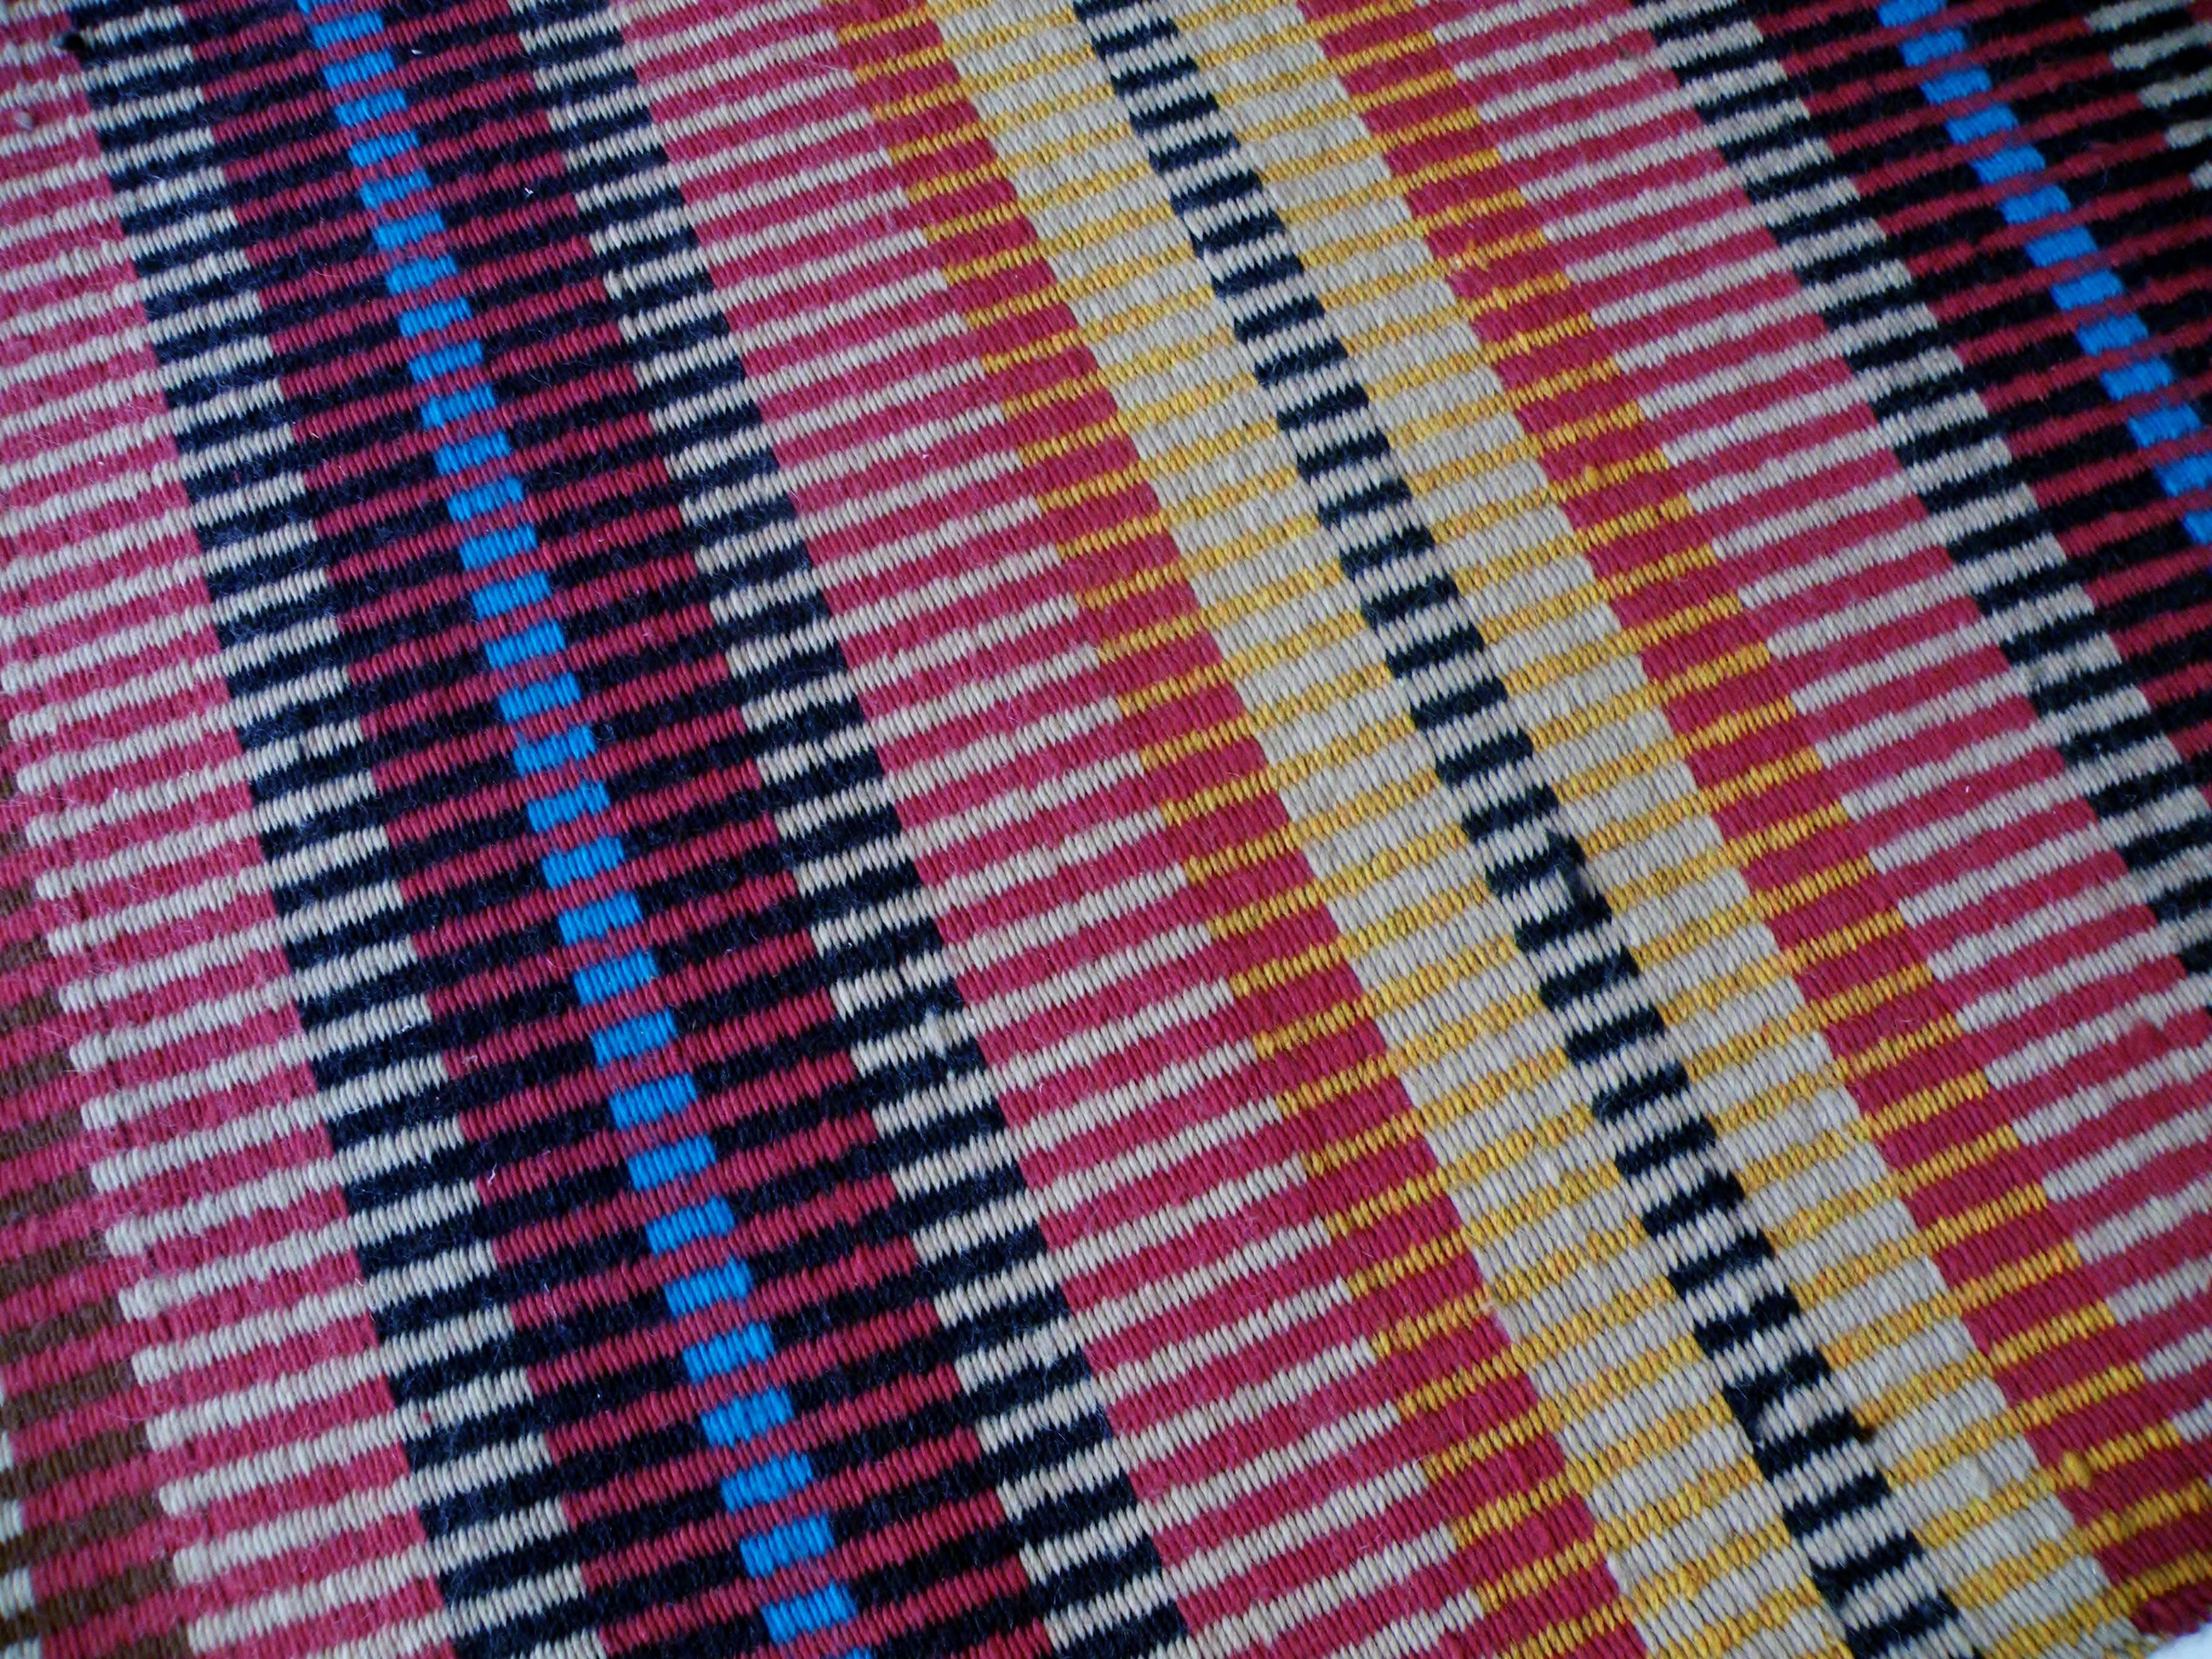 American California Craft Linear Abstract Woven Textile Bauhaus Inspired Rug